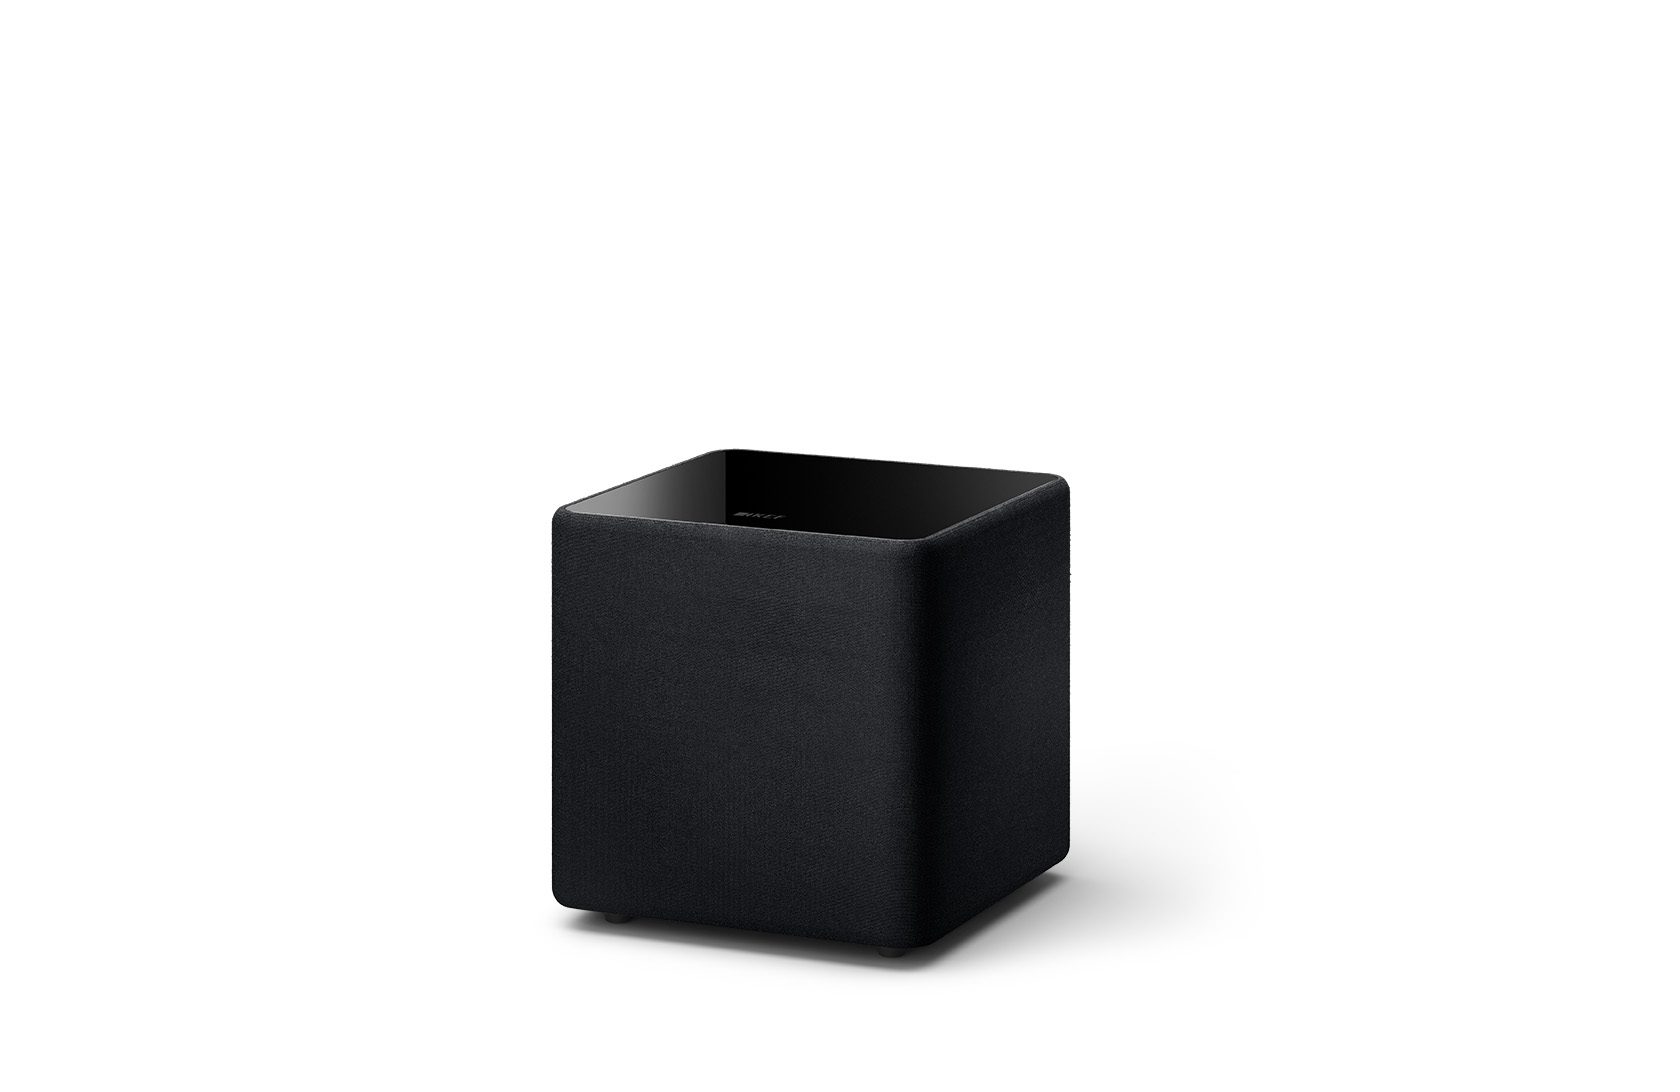 Kube 8 MIE, Subwoofer